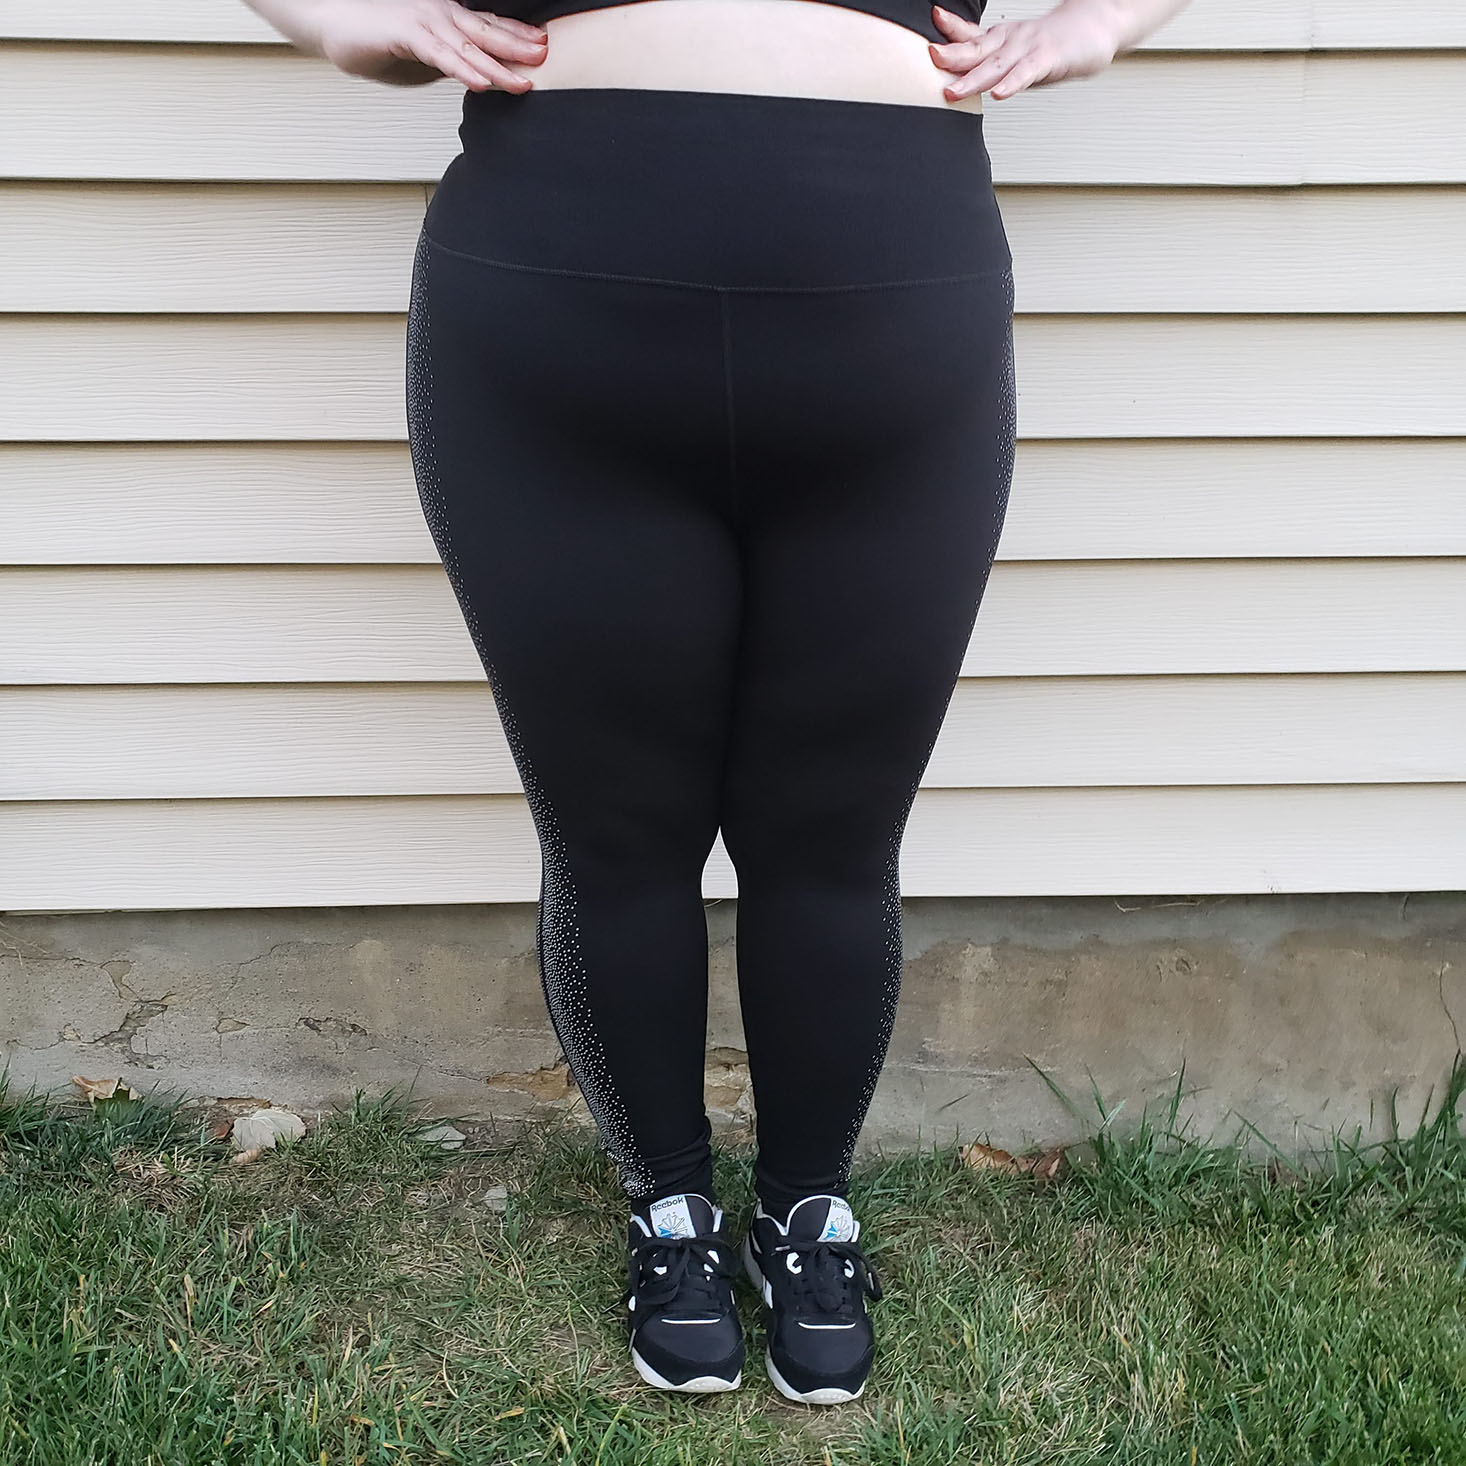 Fabletics VIP Plus Size Review + Coupon - October 2020